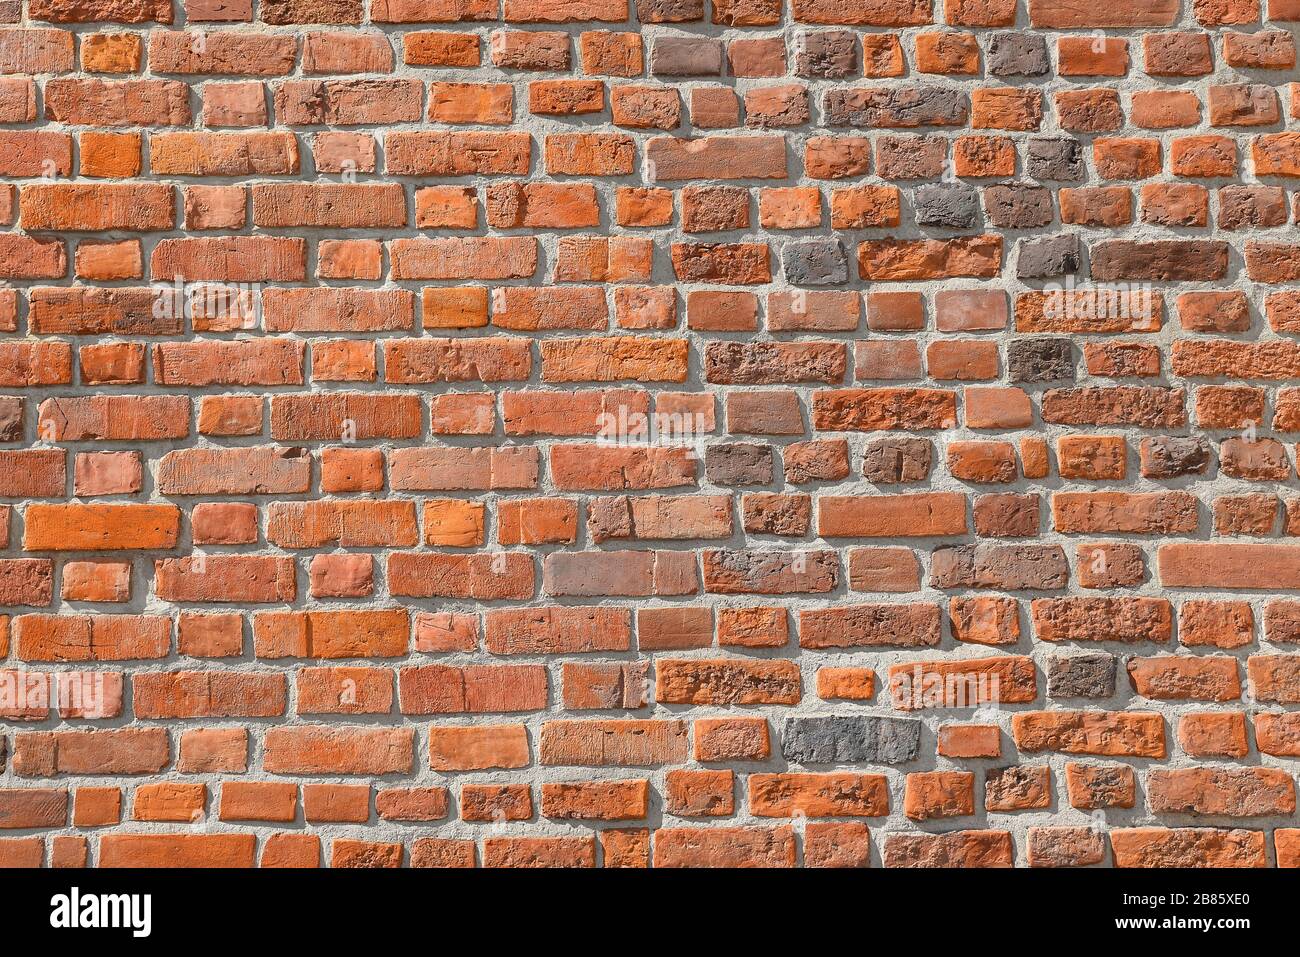 Brick wall background. Texture of a brick wall. Modern wallpaper design for  web or graphic art projects. Abstract background for business cards and co  Stock Photo - Alamy